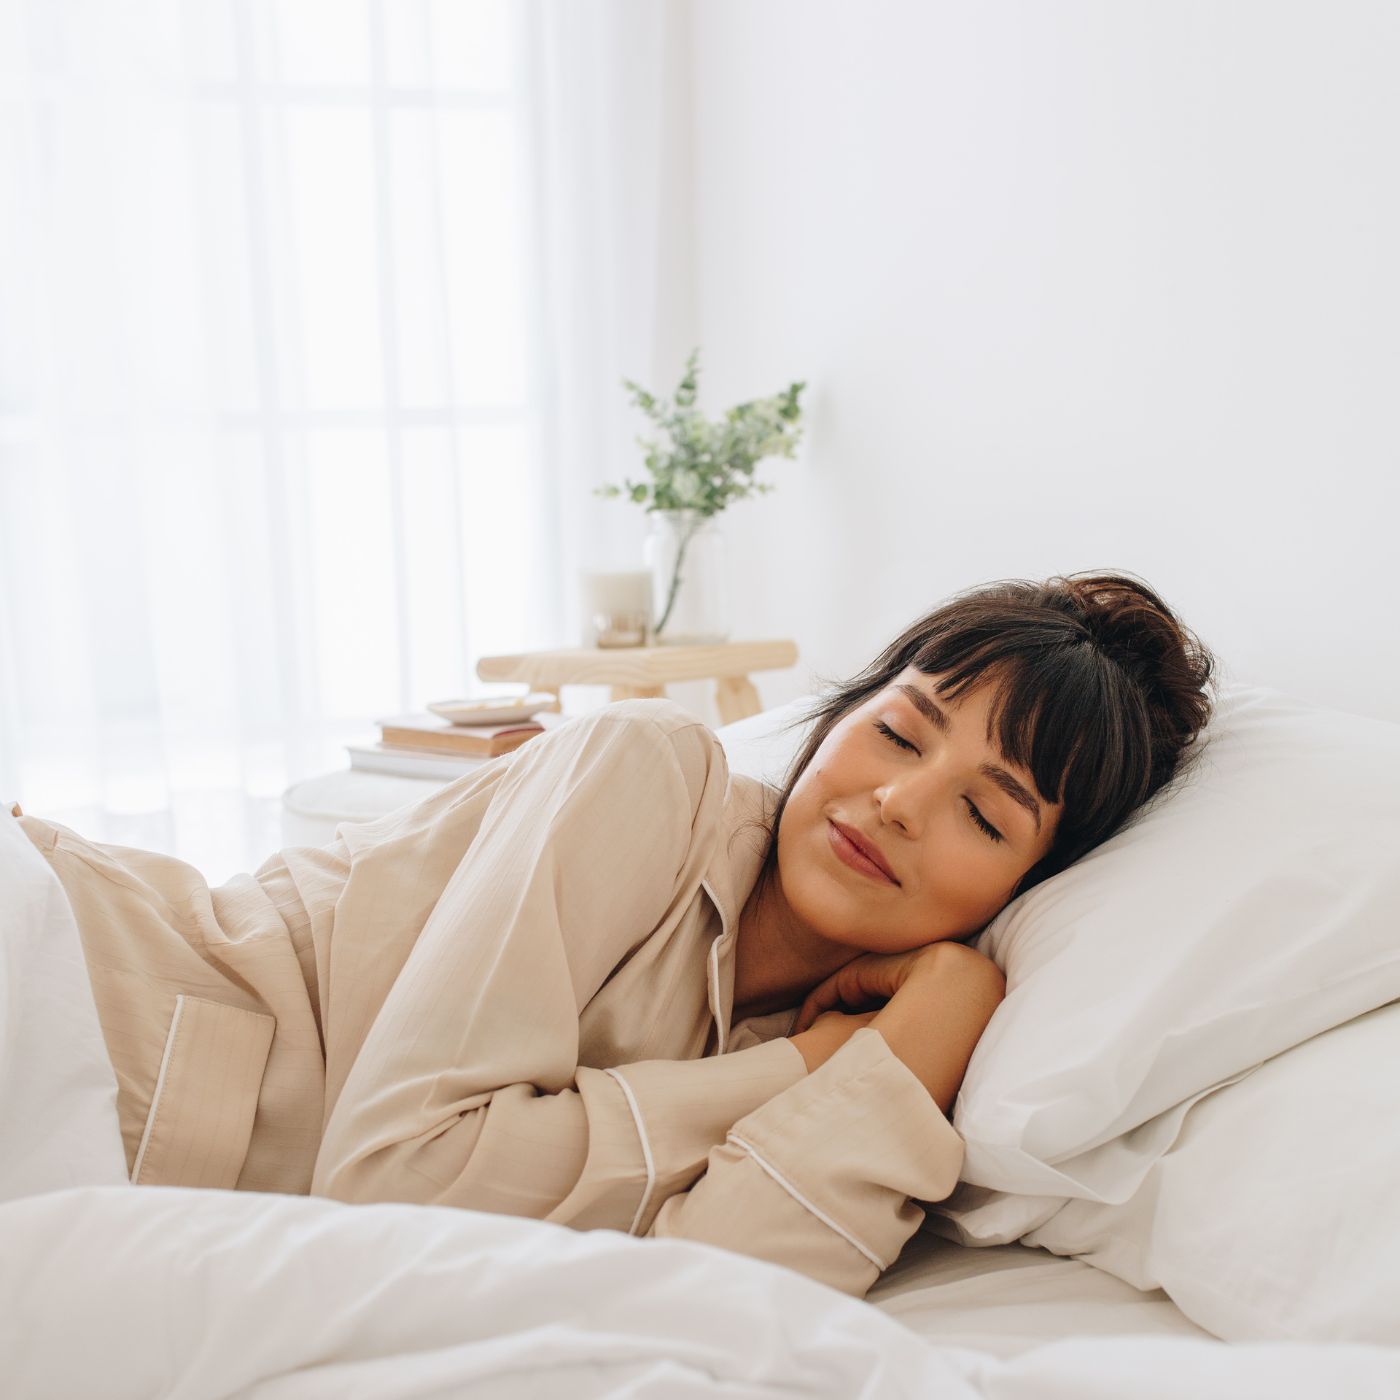 Part 2. Sleep your way to glowing skin: our top 10 tips and hacks for better snoozing